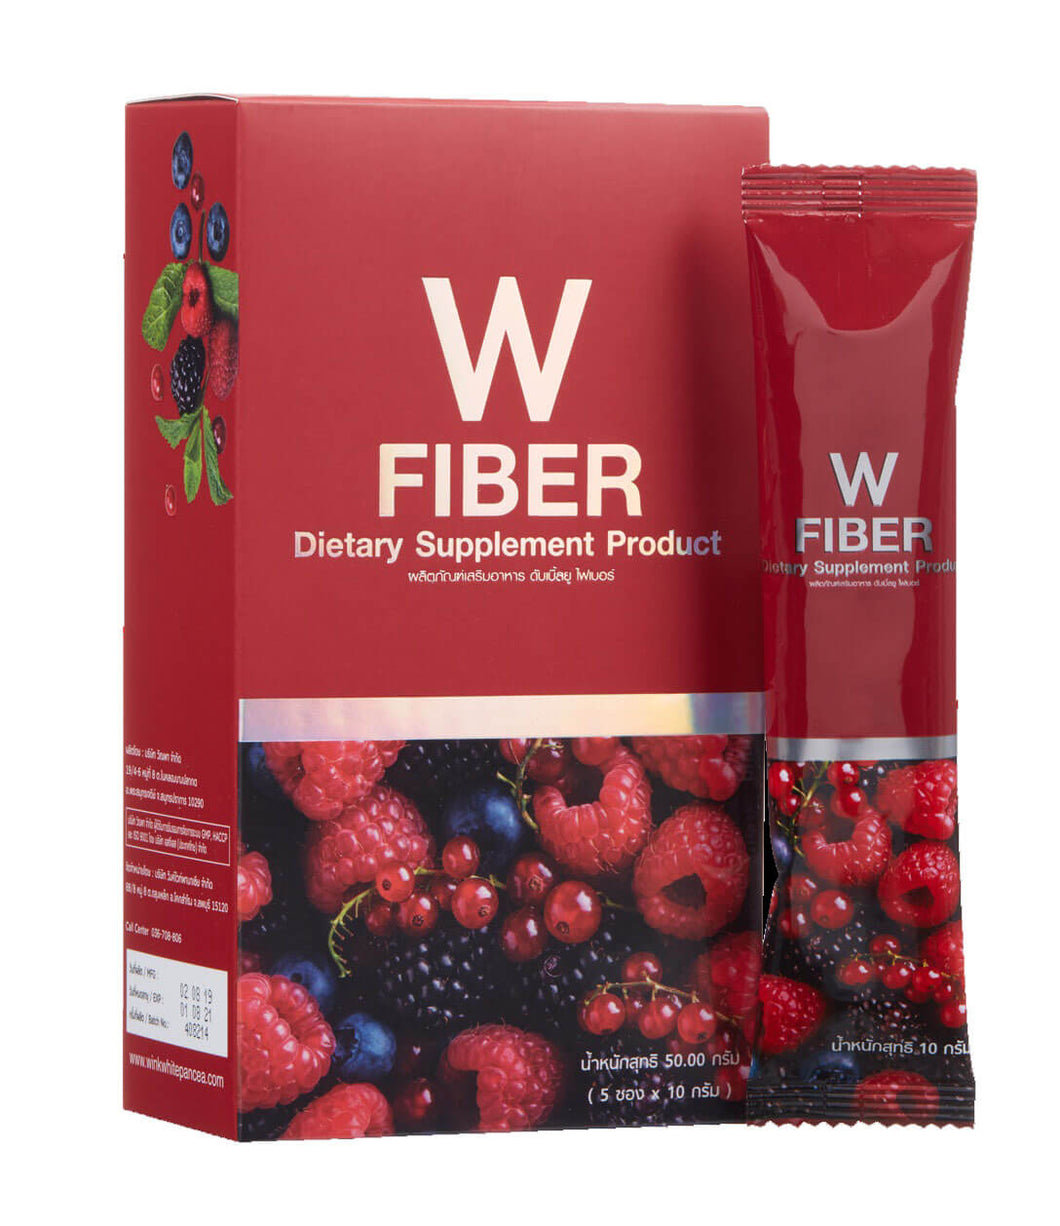 2X W FIBER Berry by Wink White Mixed Berry Detox Trap fat Weight Control